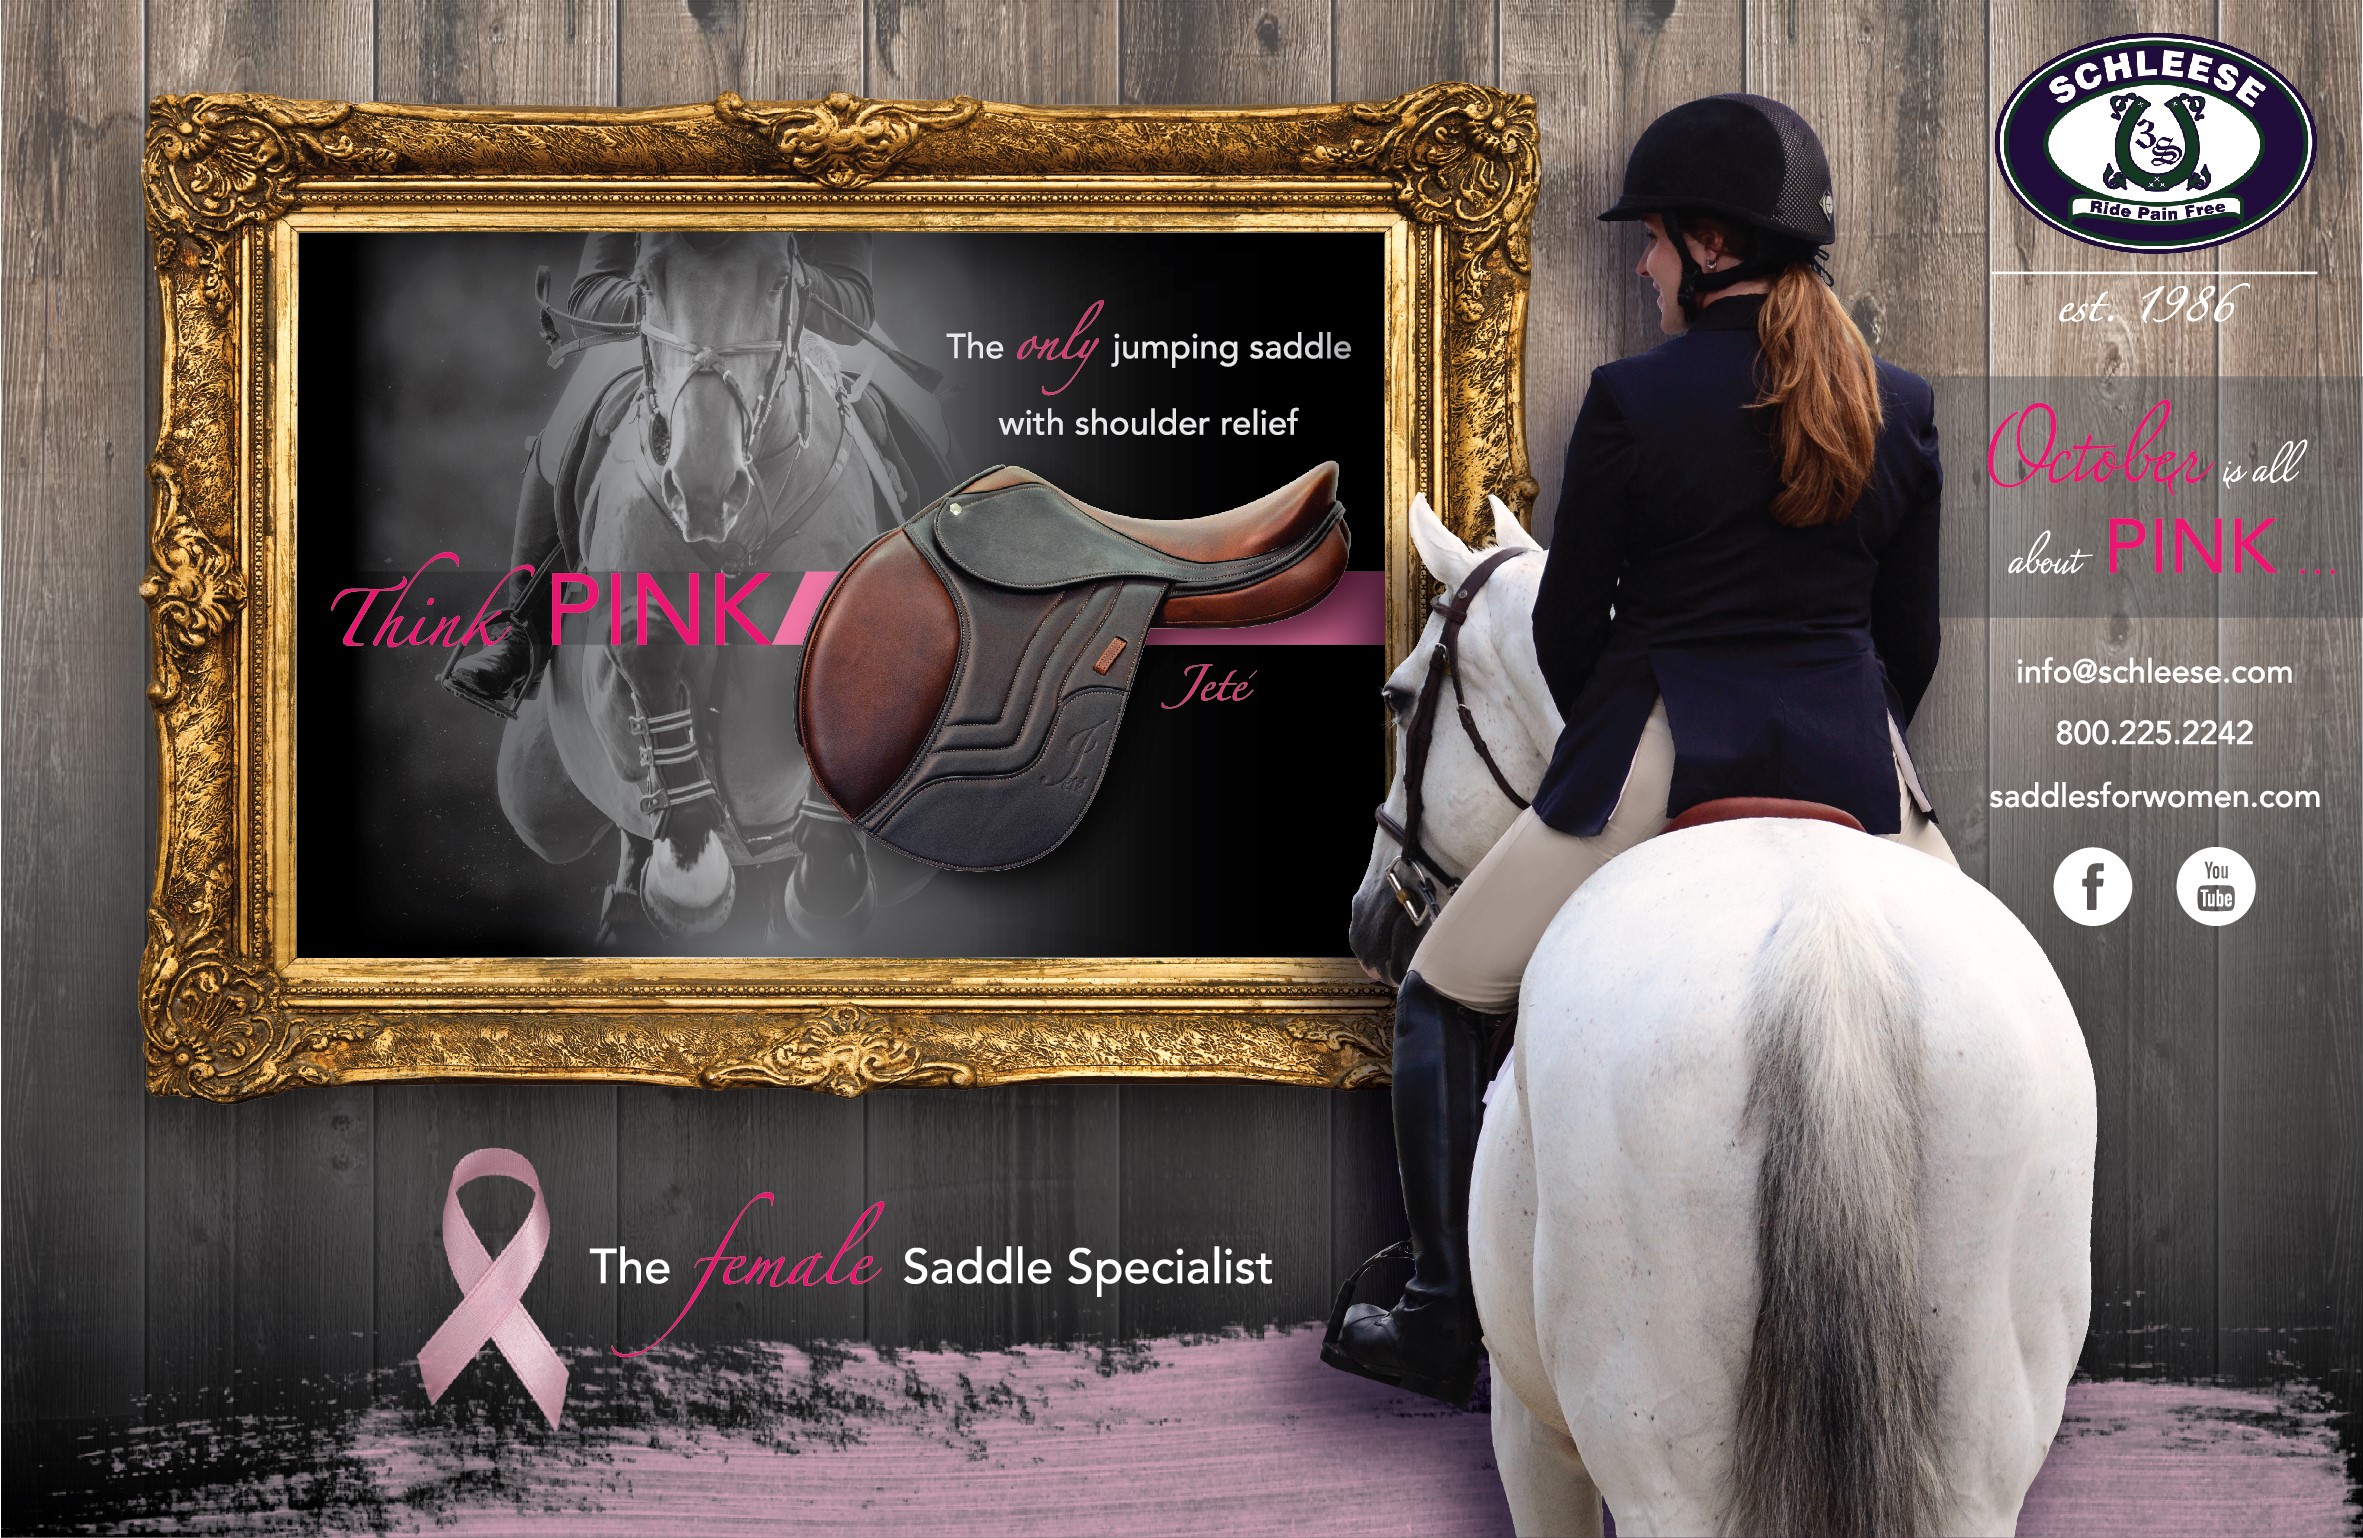 Think Pink Campaing